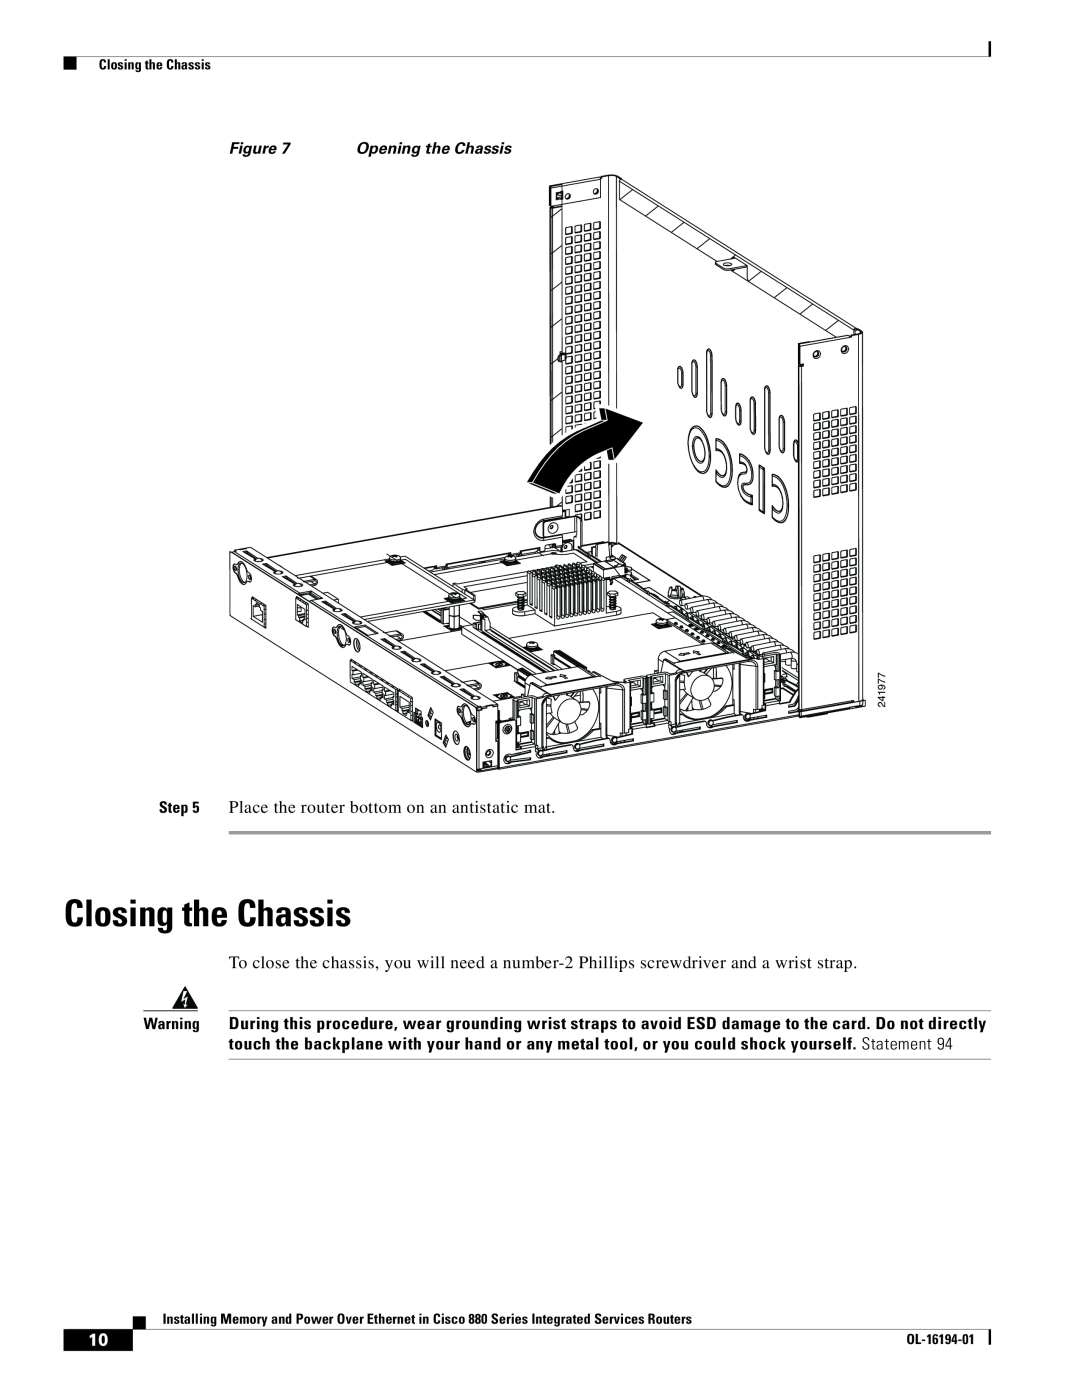 Cisco Systems 880 Series manual Closing the Chassis, Opening the Chassis, OL-16194-01, 241977 